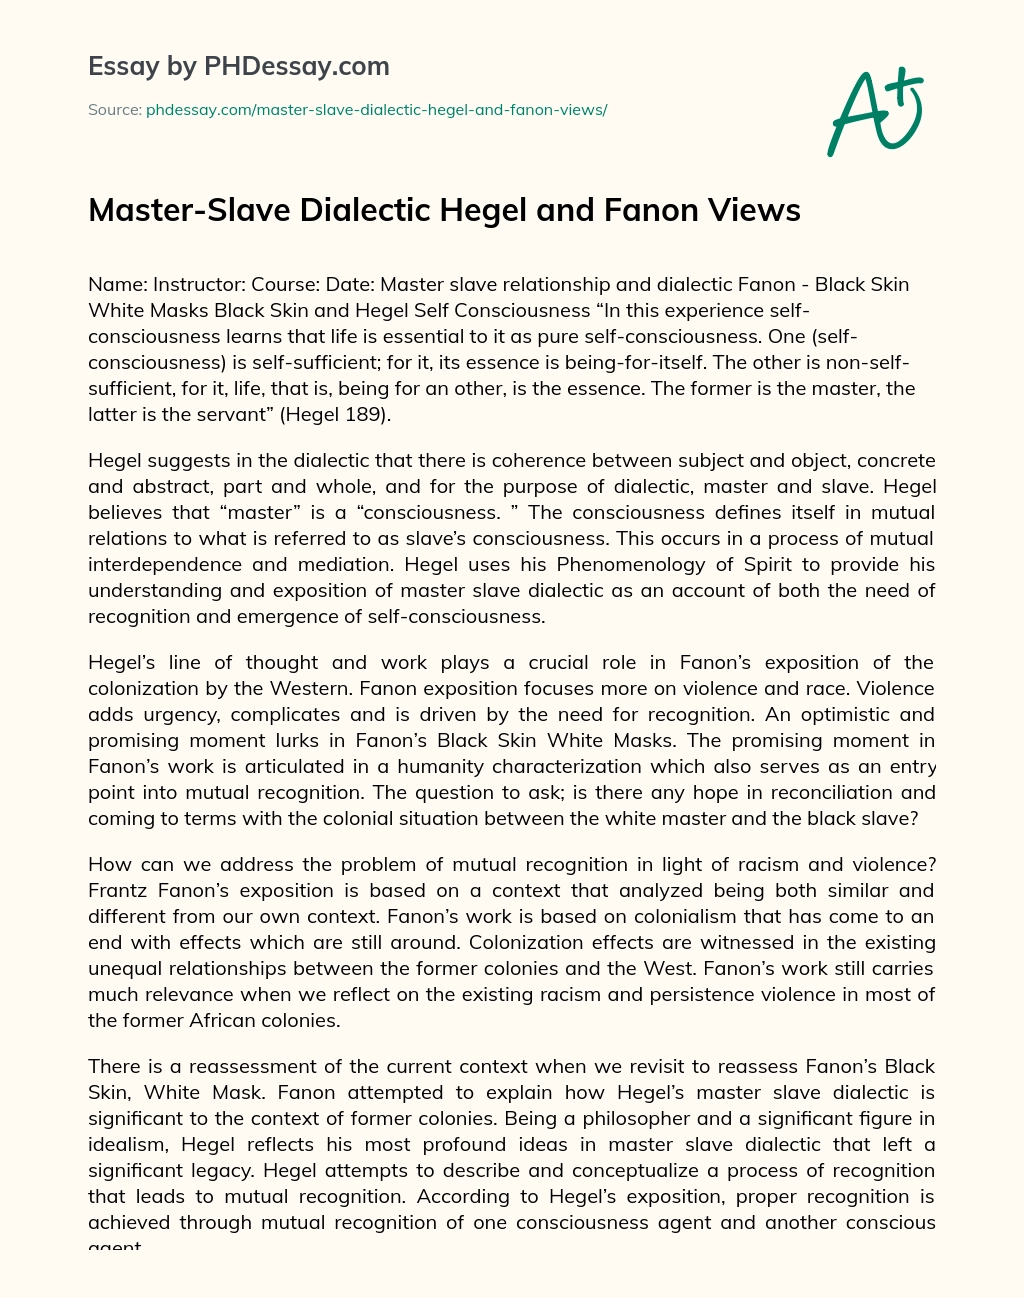 Master-Slave Dialectic Hegel and Fanon Views essay